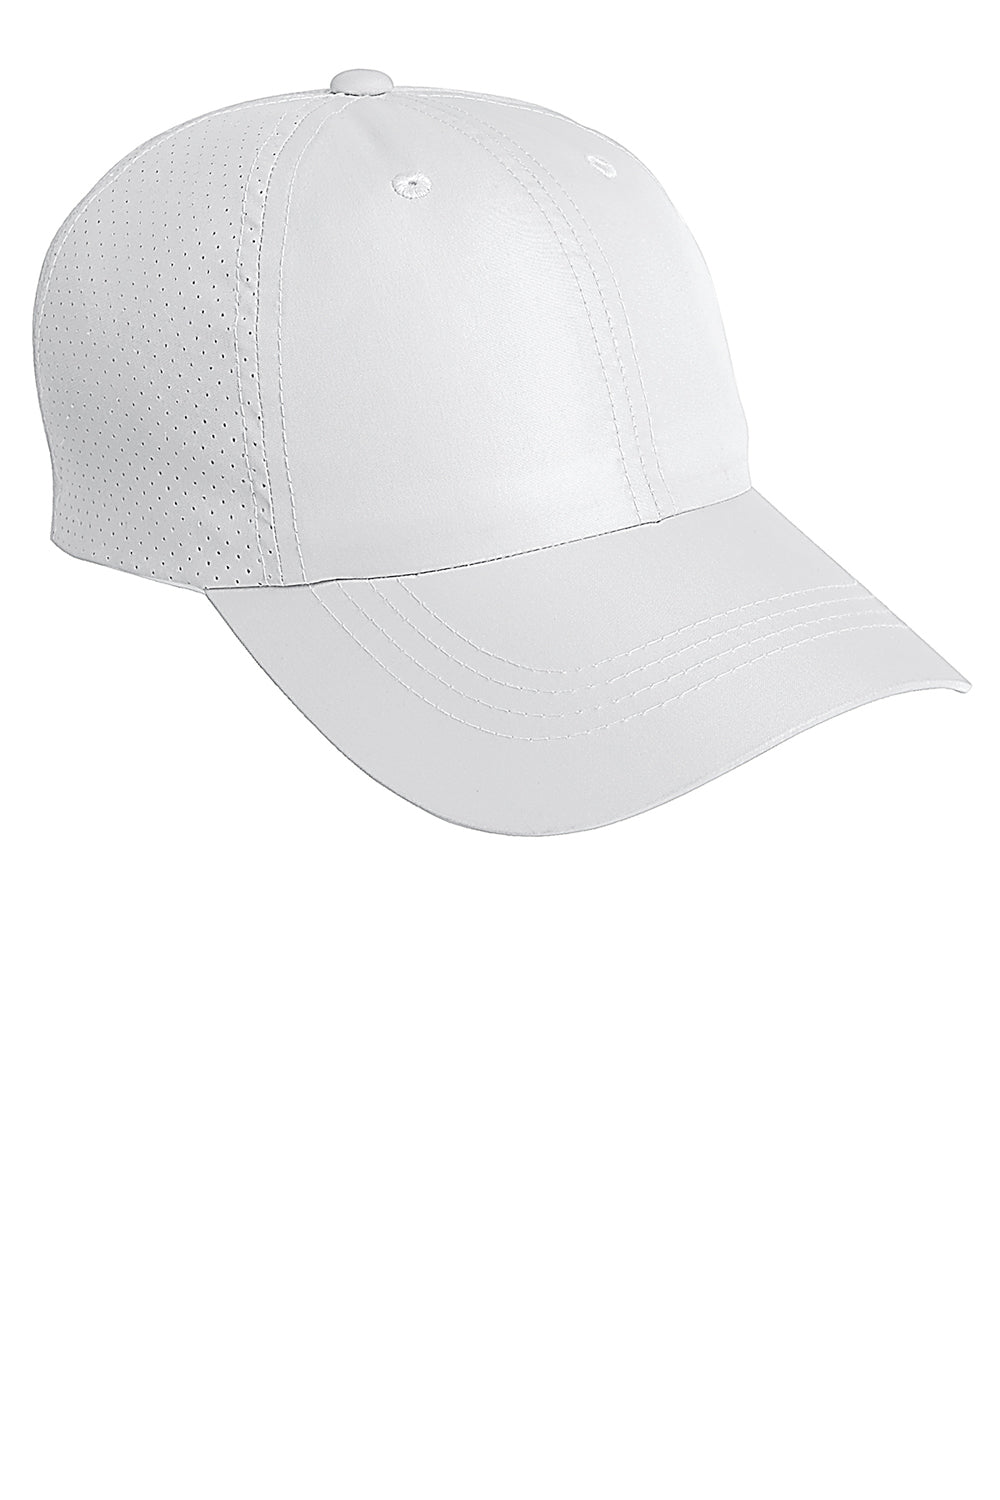 Port Authority C821 Mens Moisture Wicking Adjustable Hat White Front